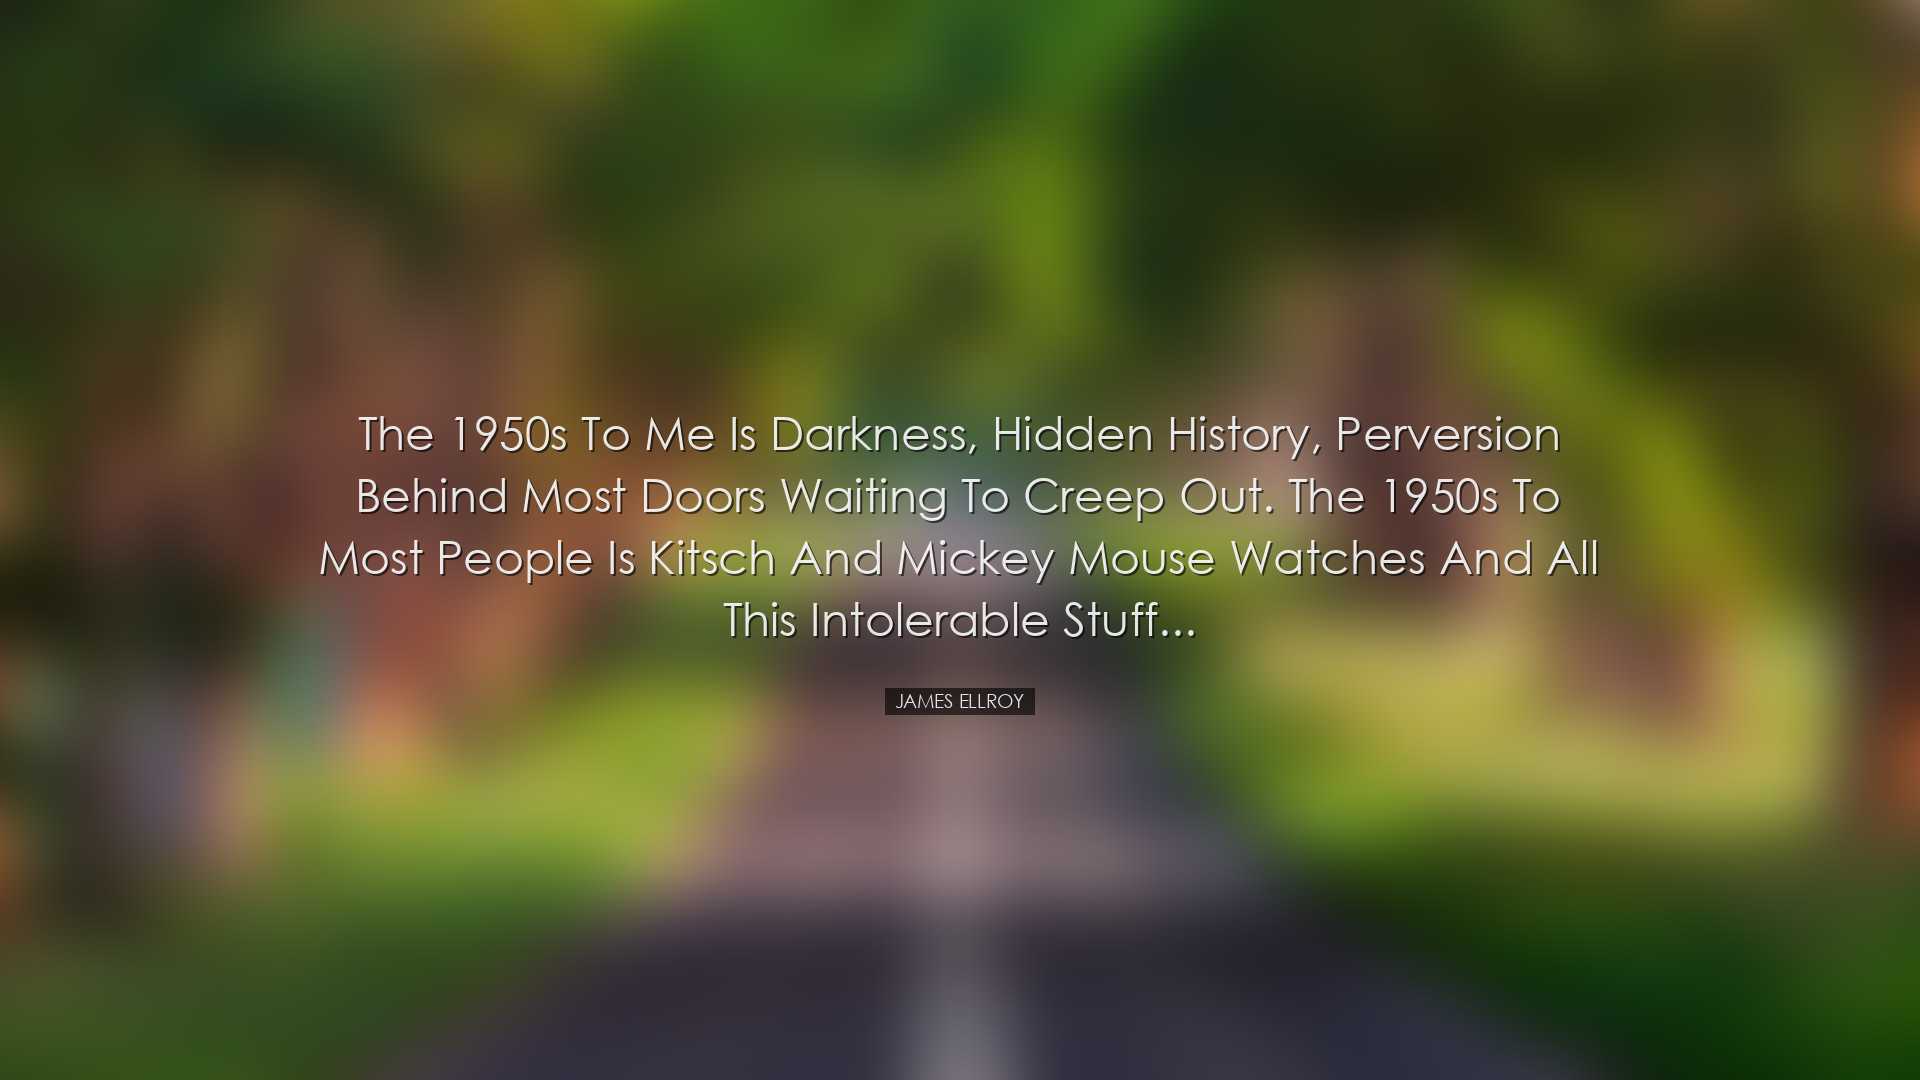 The 1950s to me is darkness, hidden history, perversion behind mos